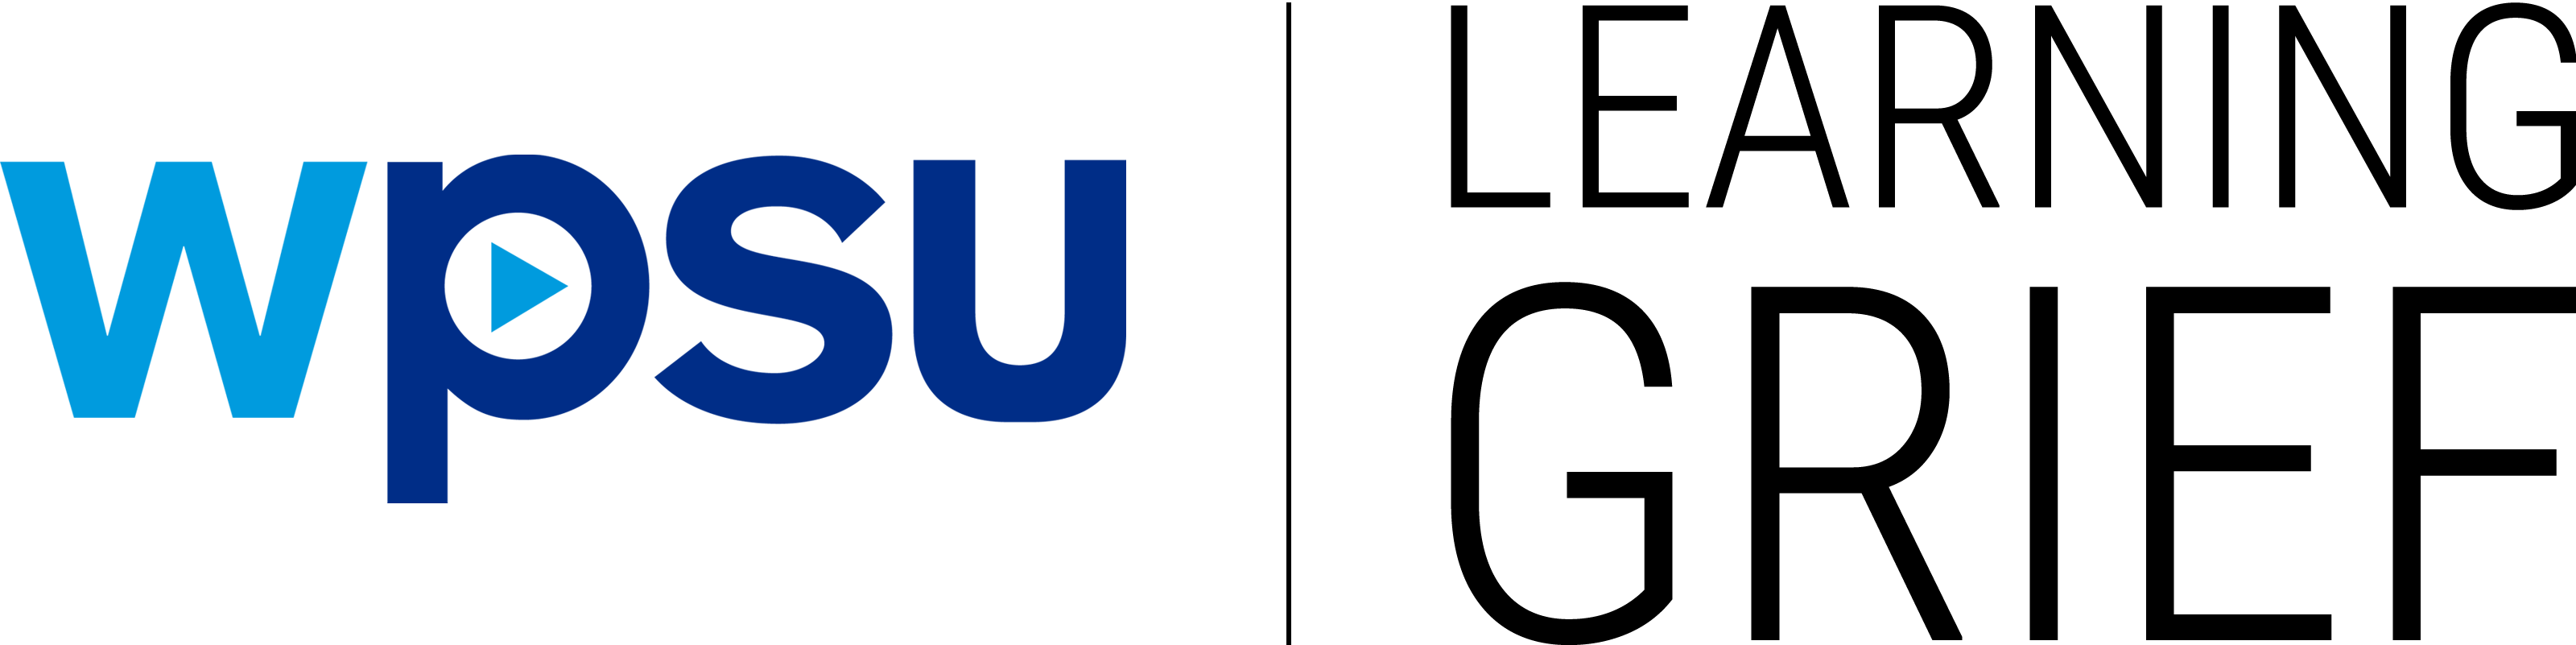 WPSU and Learning Grief text-based logos